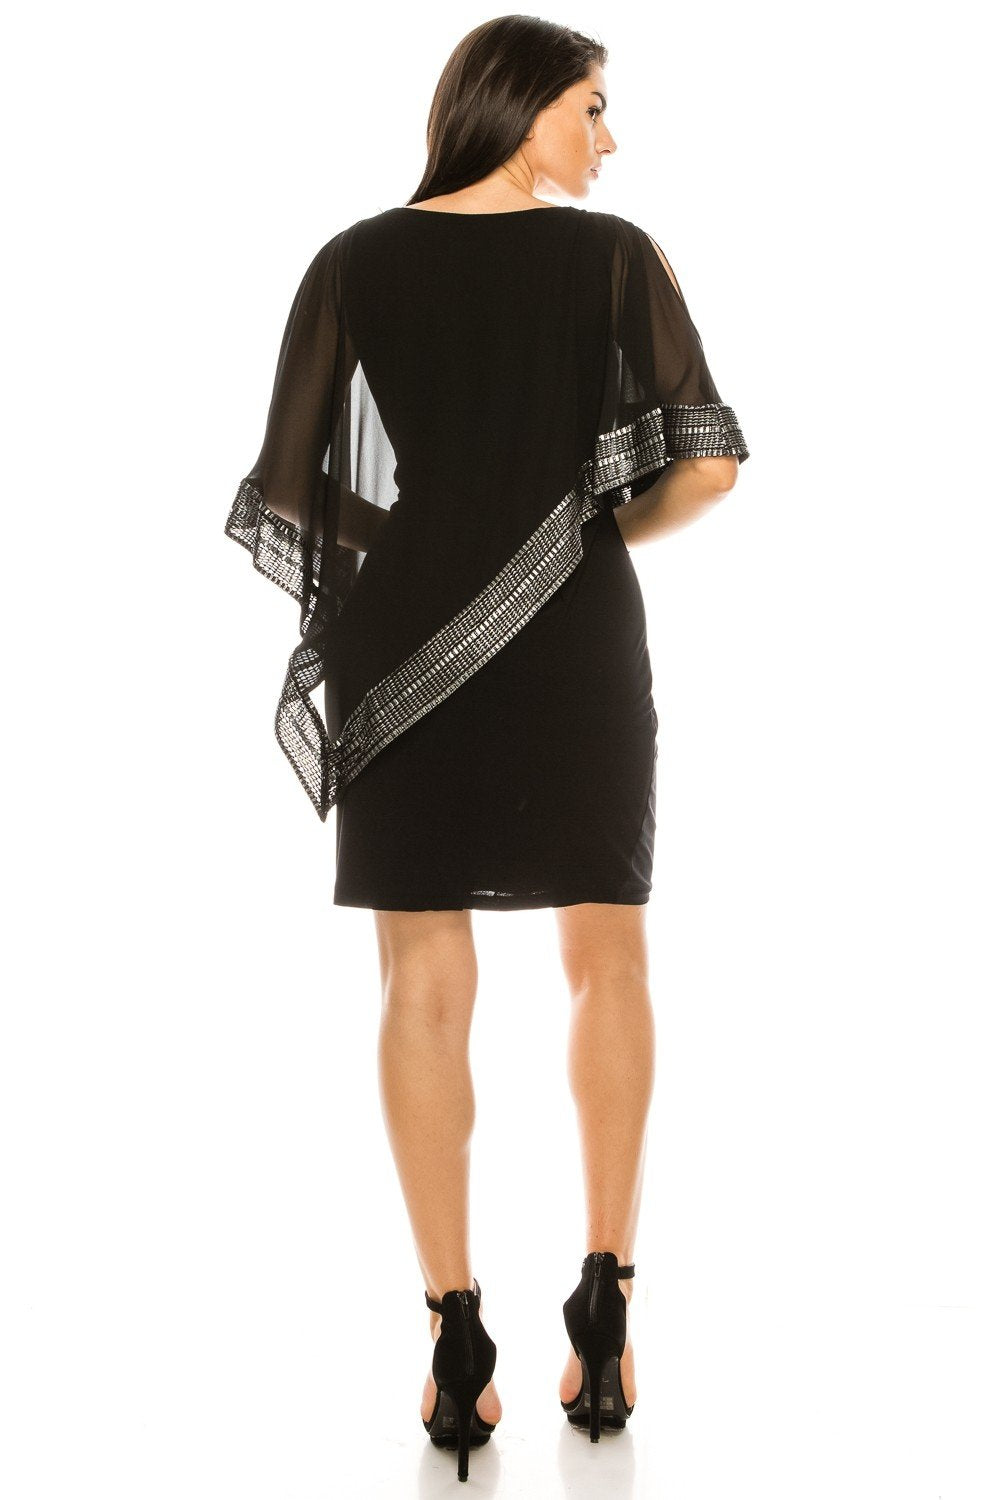 SLNY - 111176 Jersey Sheath Dress with Foil Trim Capelet In Black and Silver